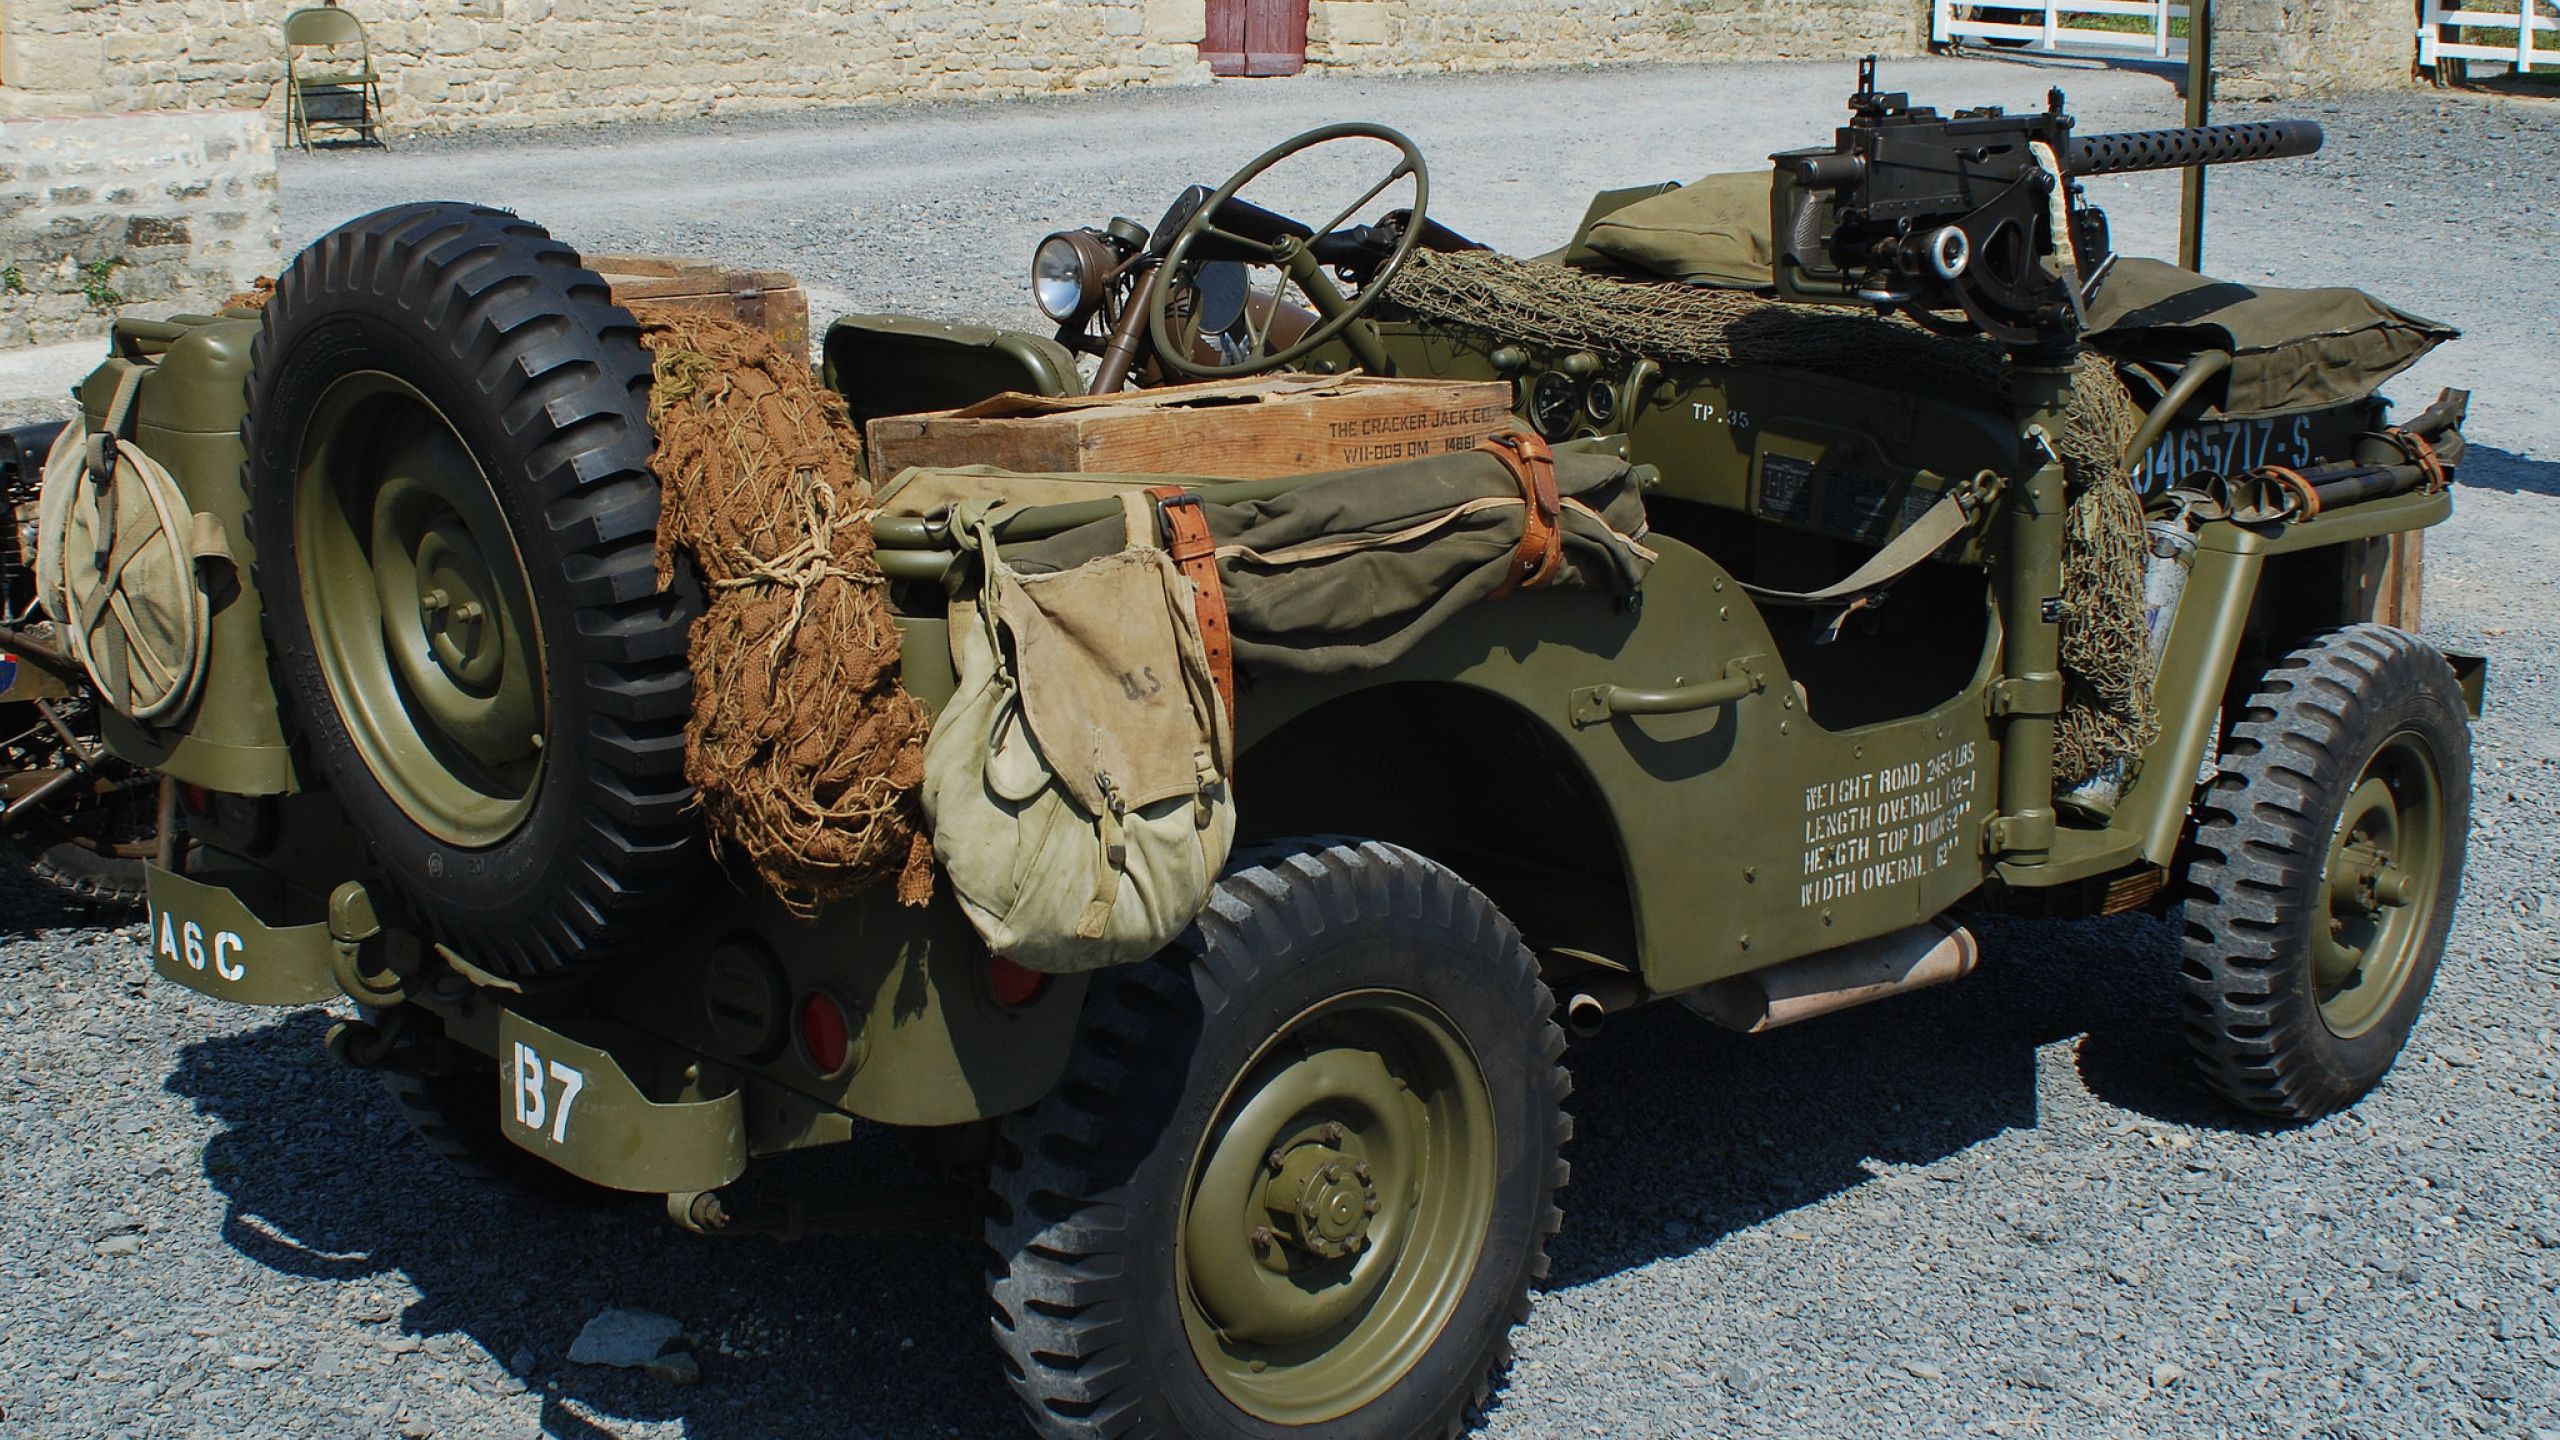 willys mb, jeep, army vehicle 1440P Resolution Wallpaper, HD Cars 4K Wallpaper, Image, Photo and Background